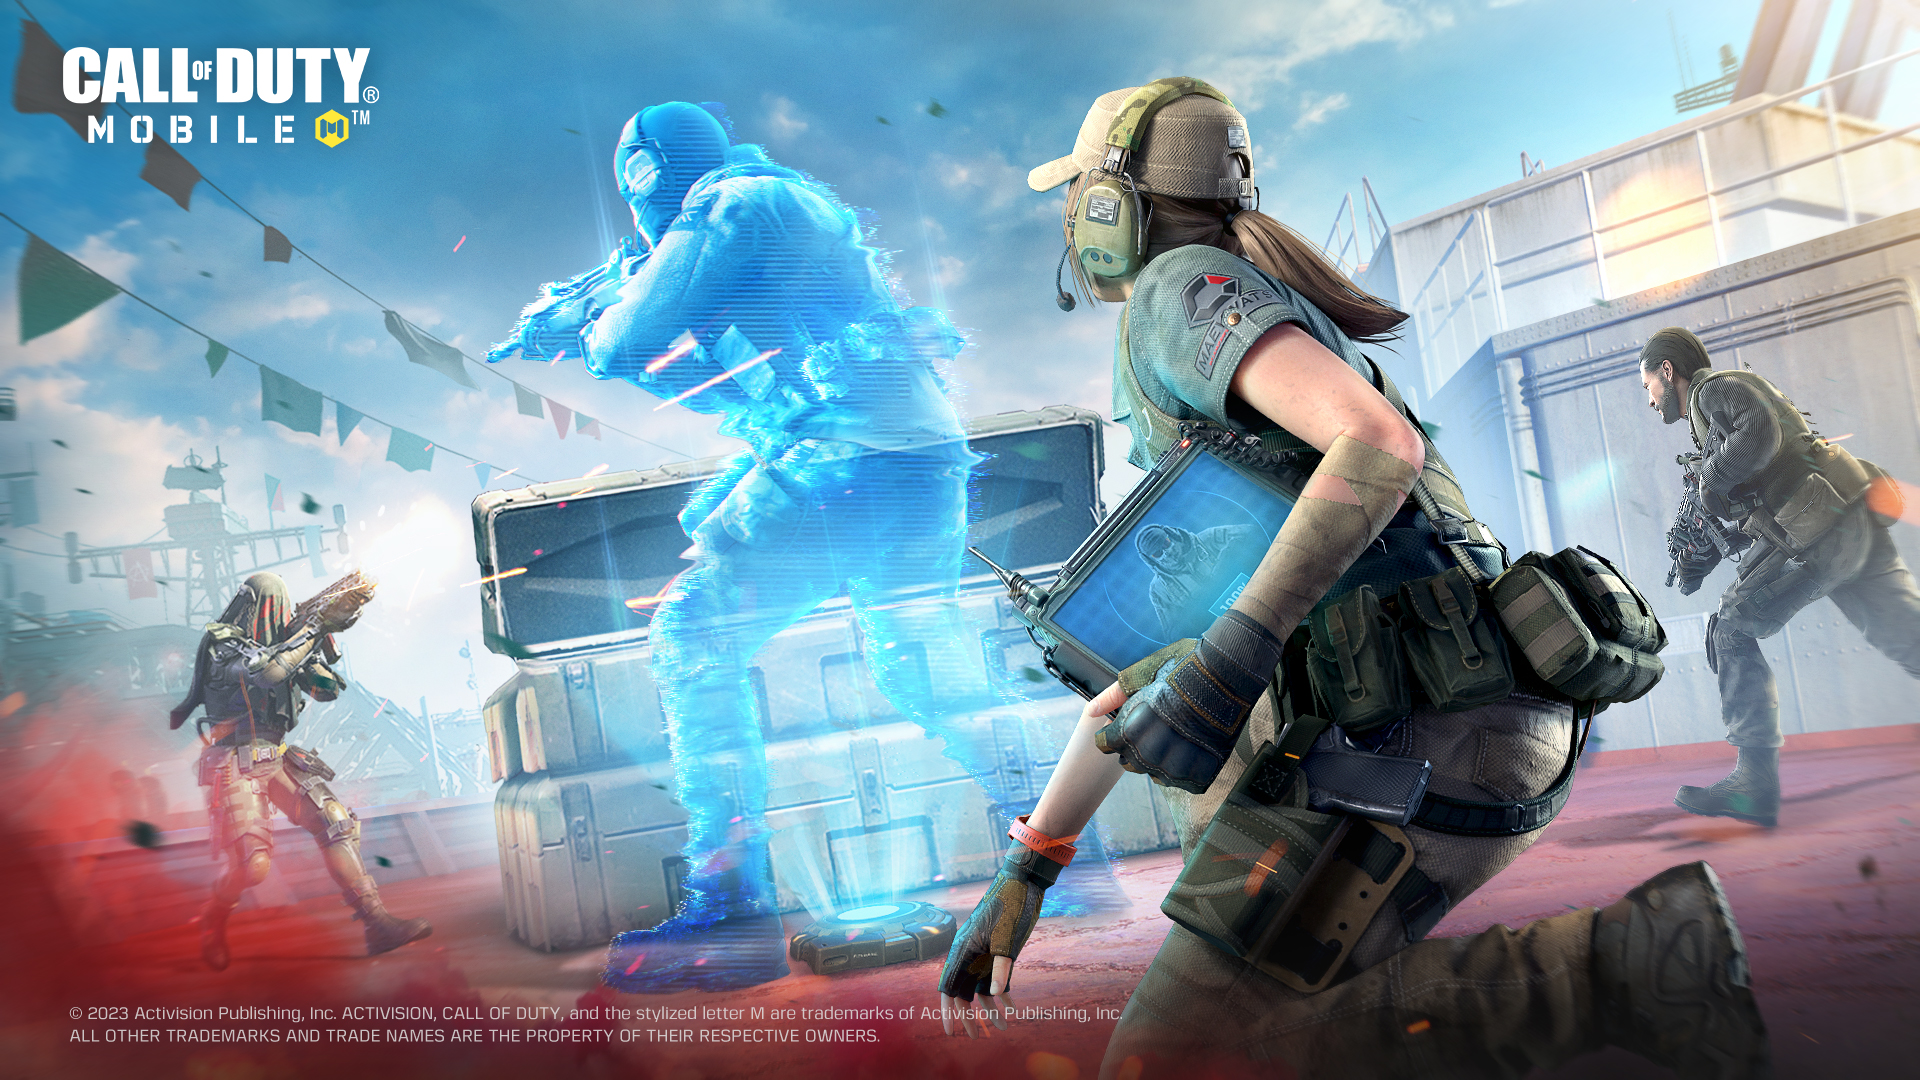 A familiar Multiplayer mode makes its COD: Mobile debut in Season 5 — Get Wrecked!